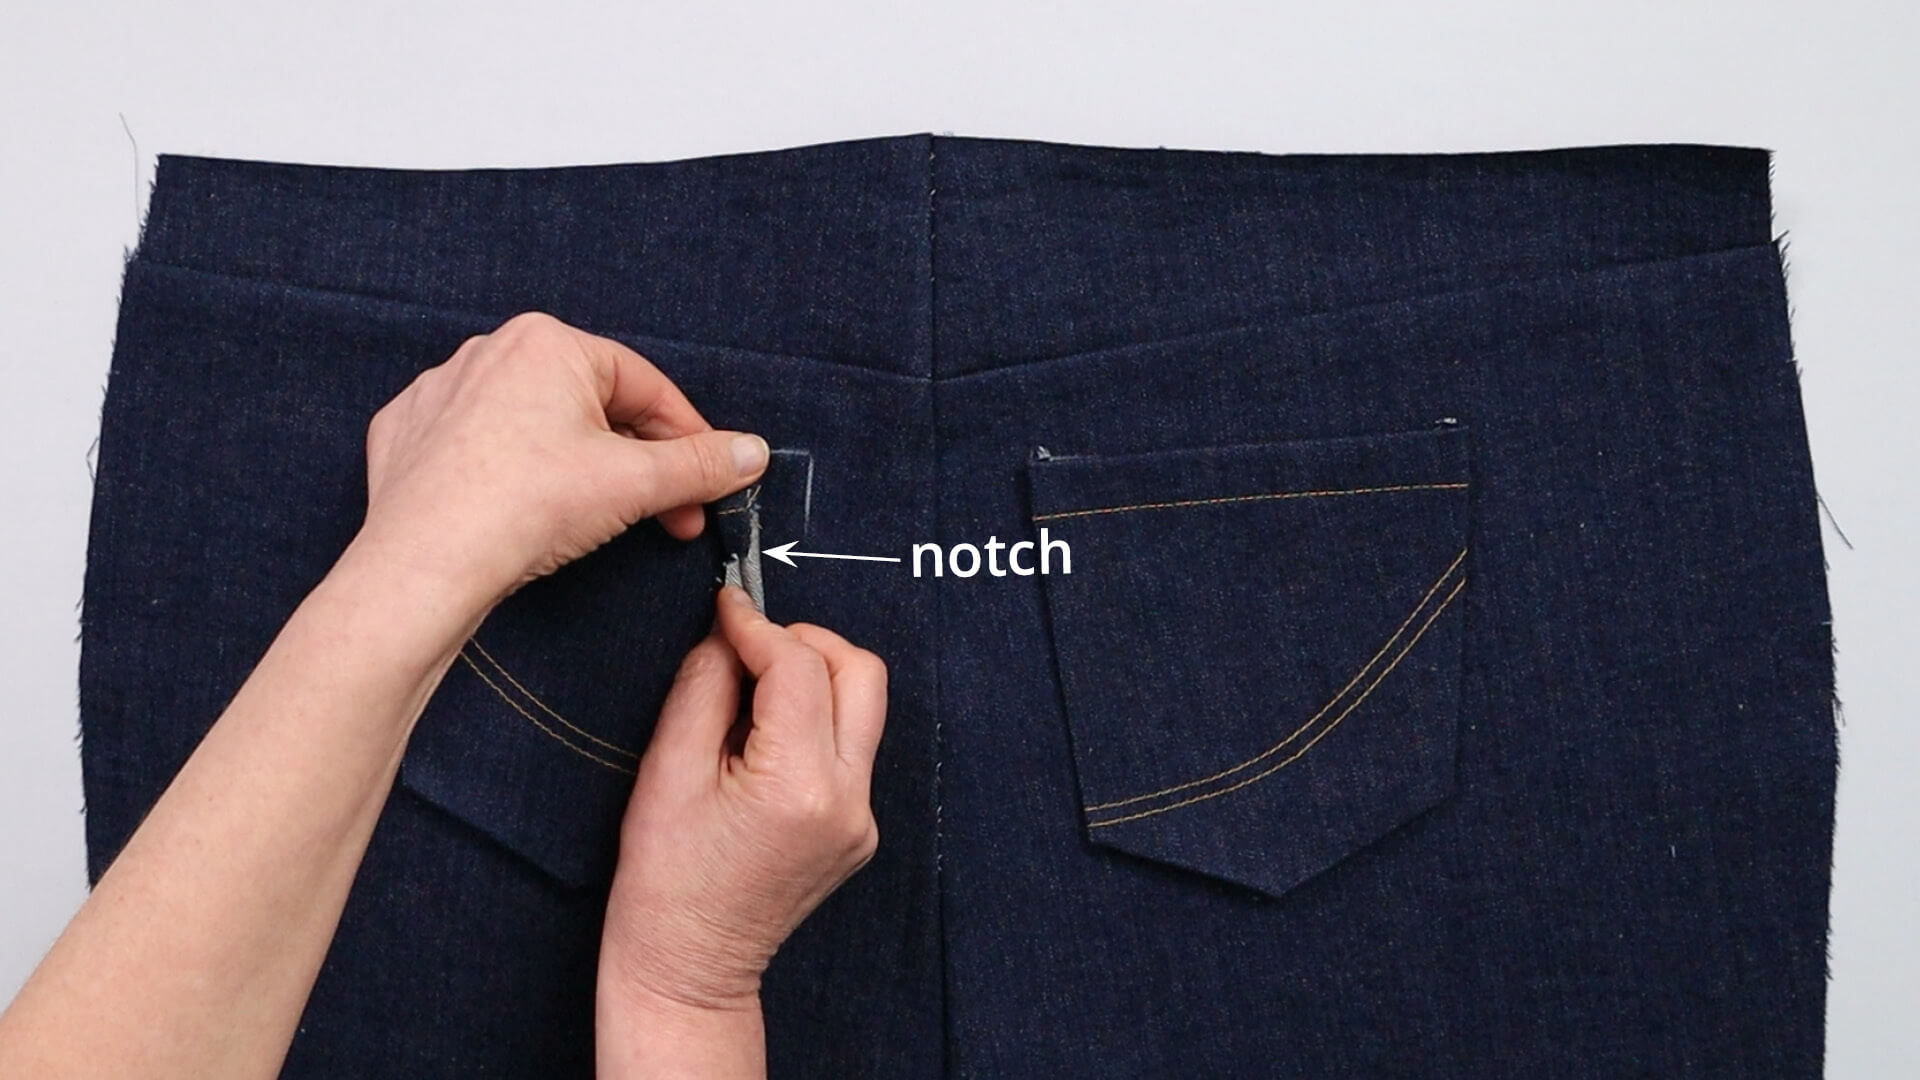 smartPATTERN sewing instructions for preparing a pair of jeans - for fitting - place right pocket with snap to seat seam on back trousers